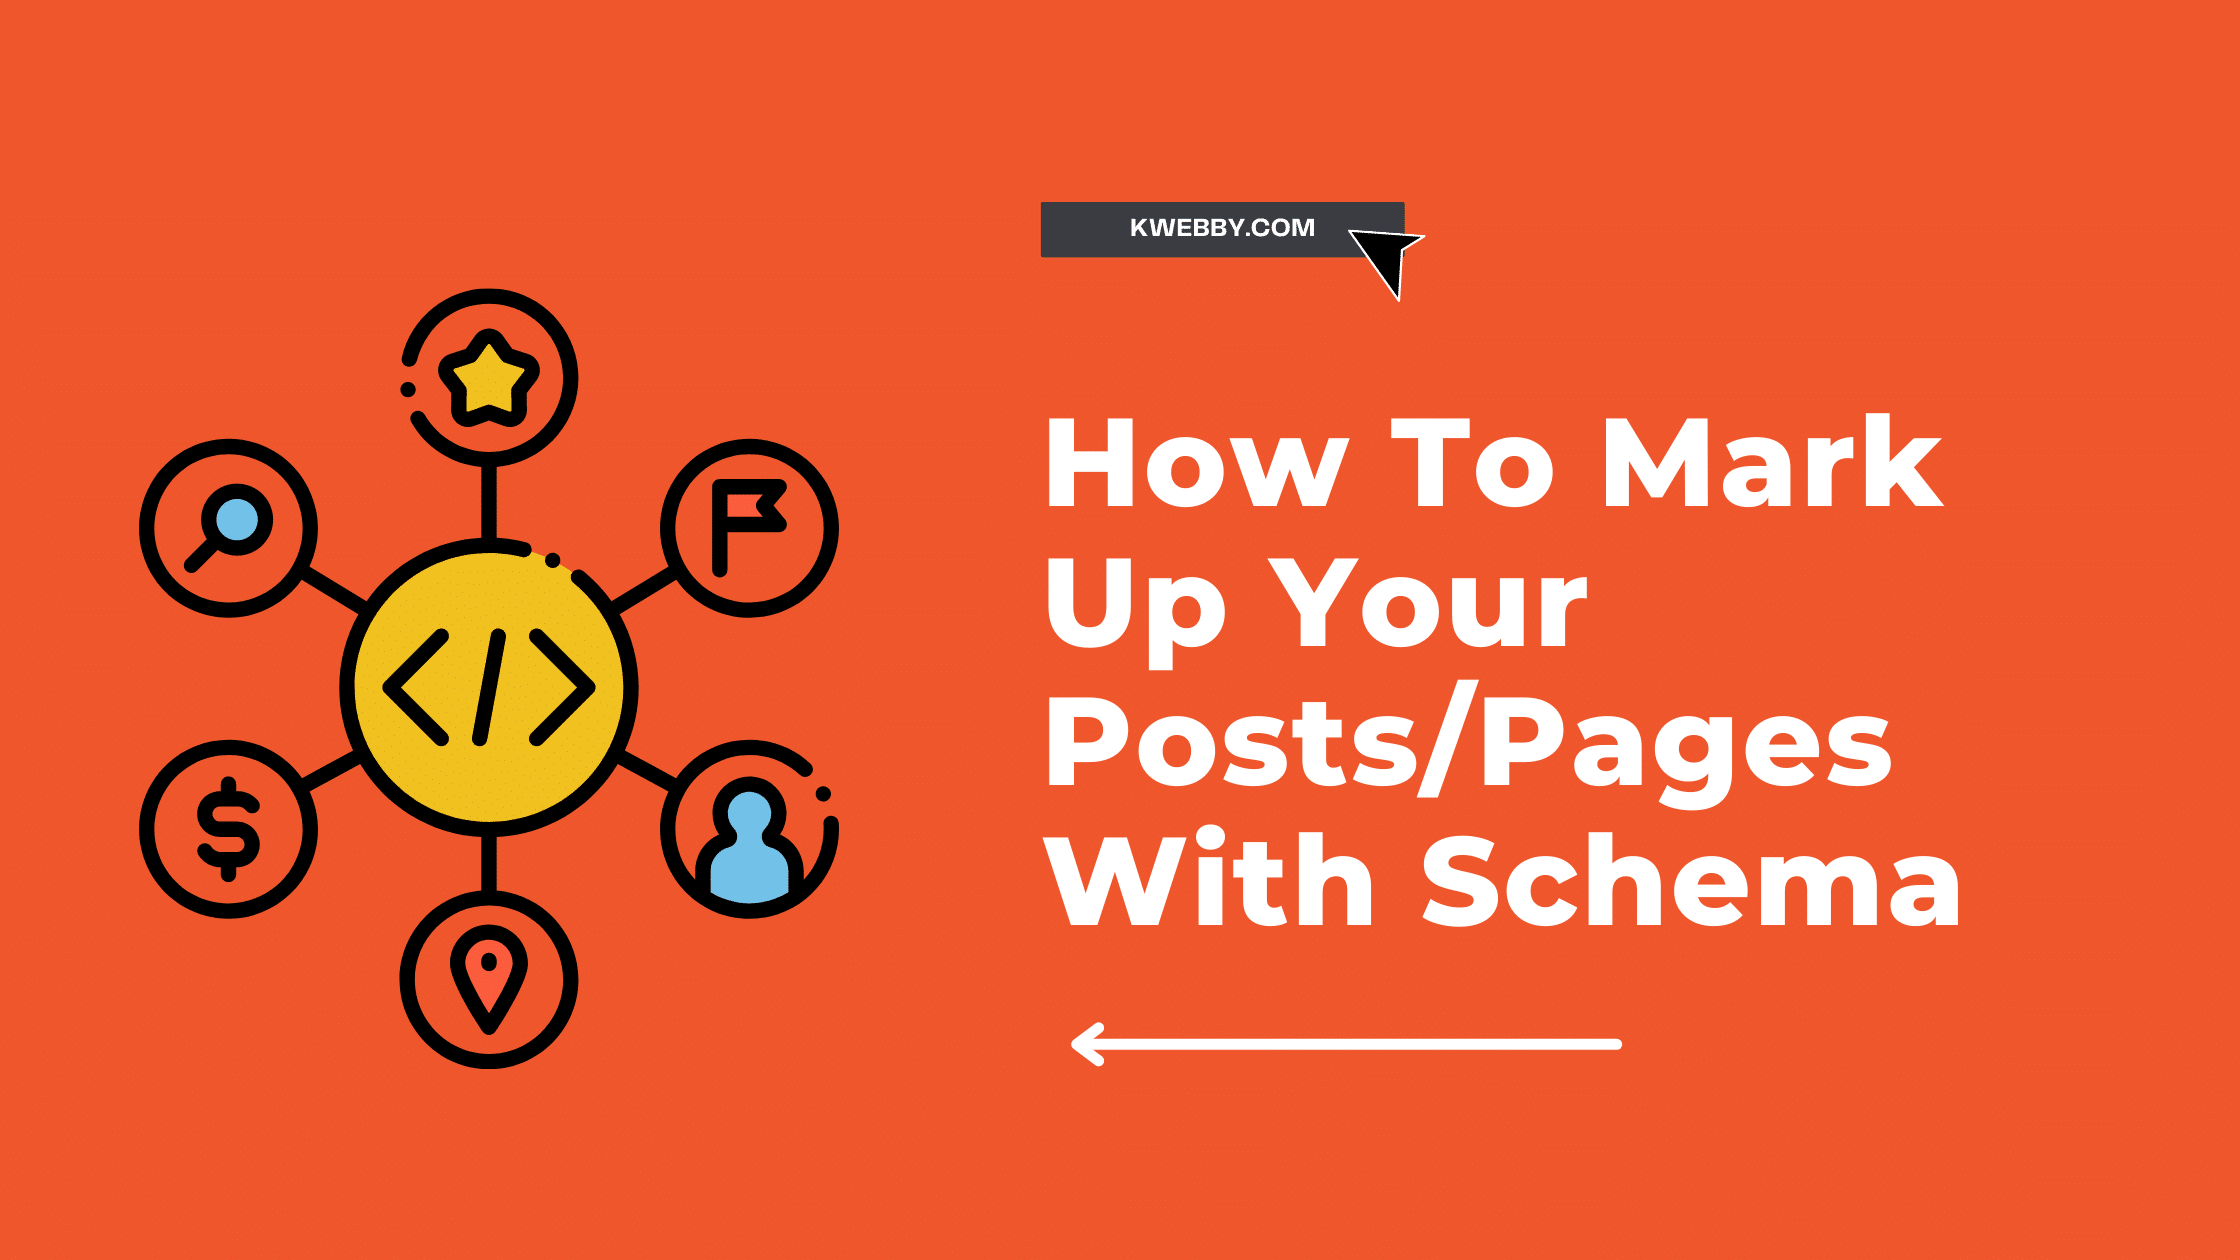 How To Mark Up Your Posts/Pages With Schema In WordPress (2 Easy Way)